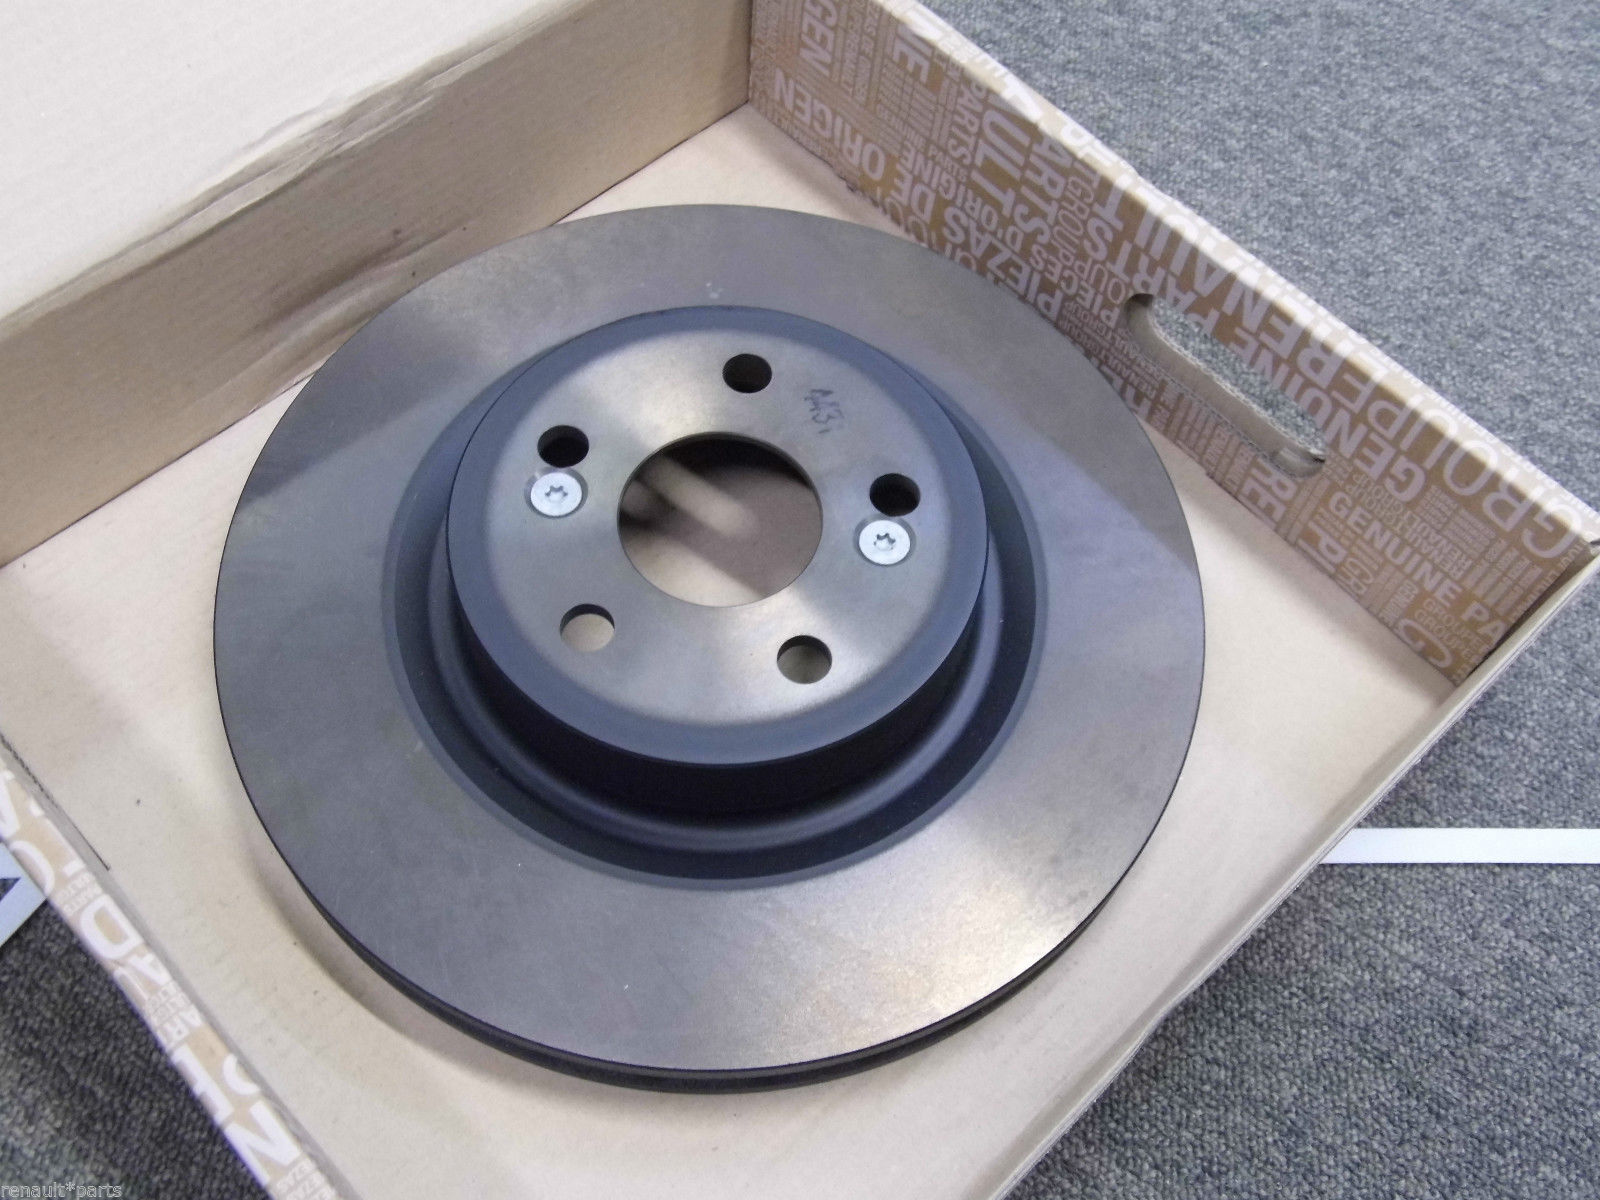 Genuine Renault Clio 197/200 Front Brake Discs  Supplied as a pair.  Brand new and genuine Renault parts.  Suitable for the Clio 197, Clio 200  Genuine Renault part number 7701208130